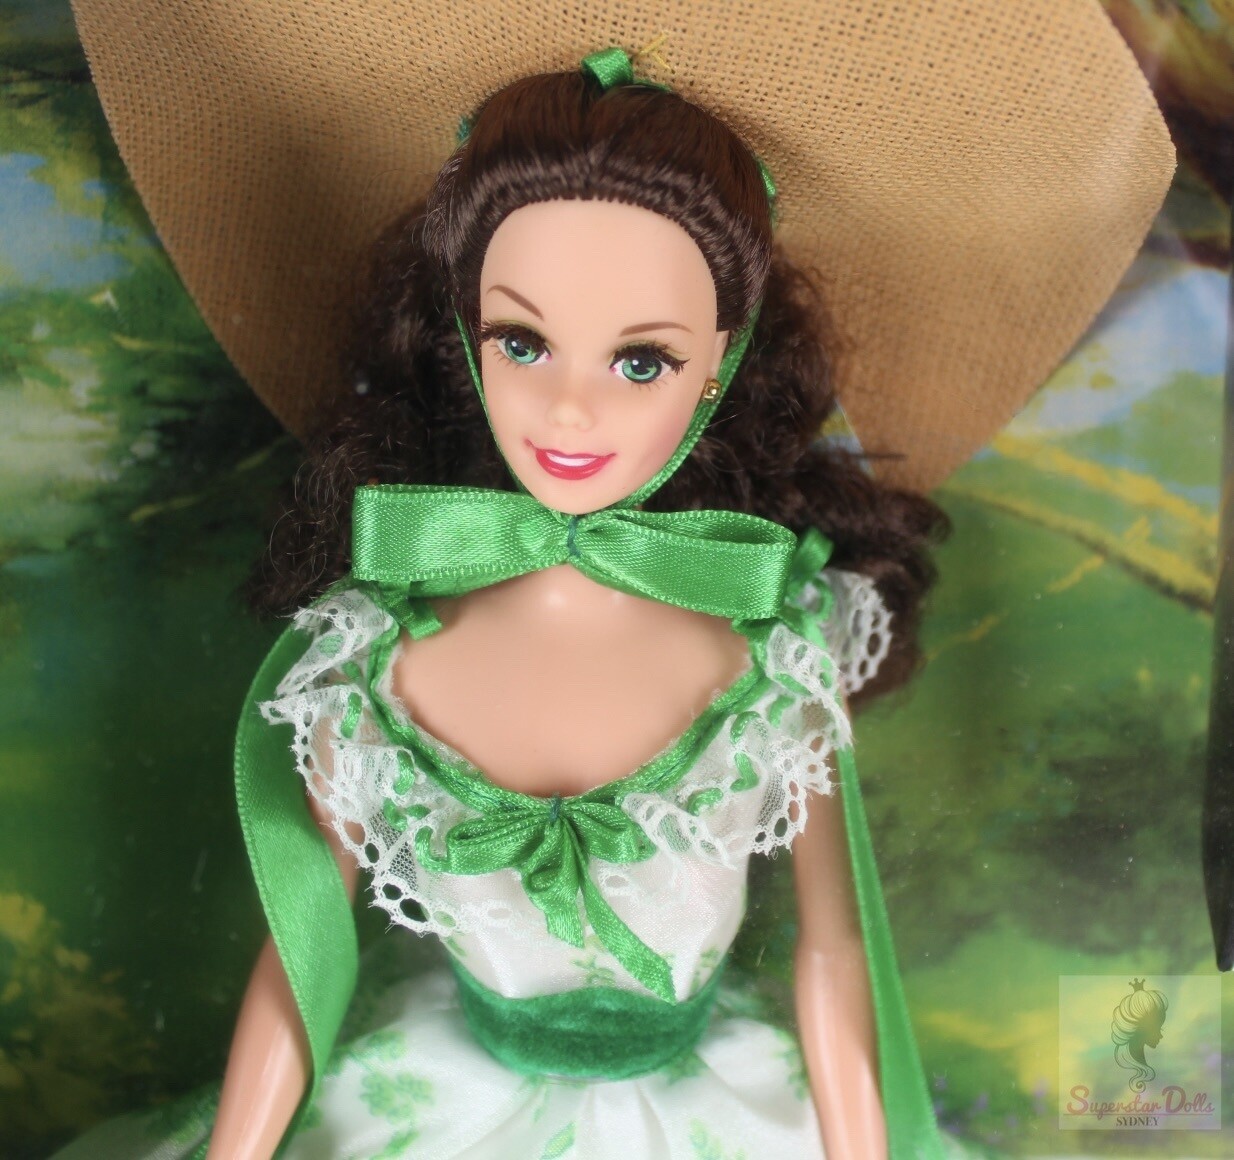 1994 Timeless Treasures: Barbie as Scarlett O'Hara From Gone With The Wind Doll